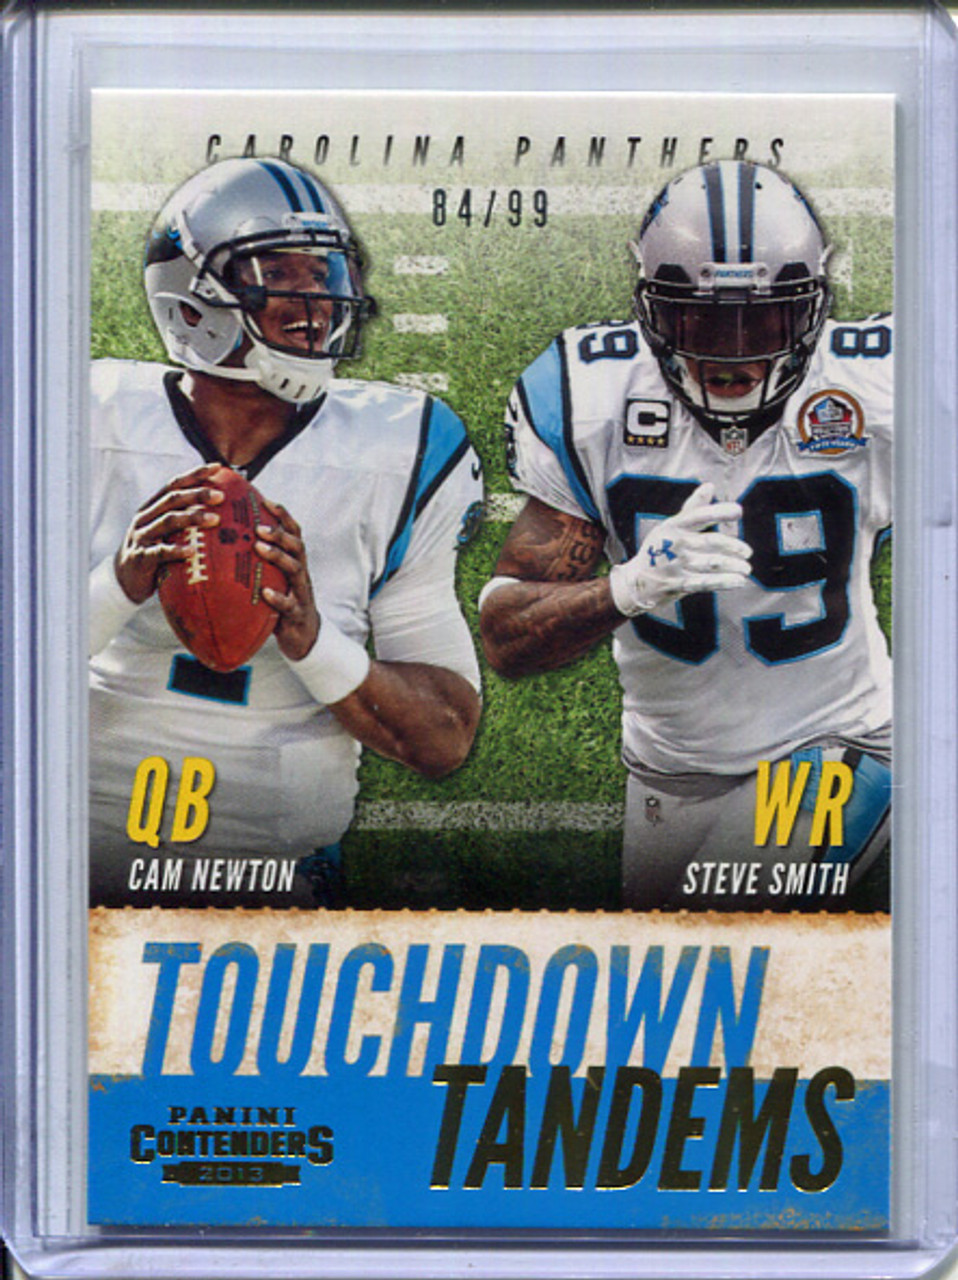 Cam Newton, Steve Smith 2013 Contenders, Touchdown Tandems #19 Gold (#84/99)